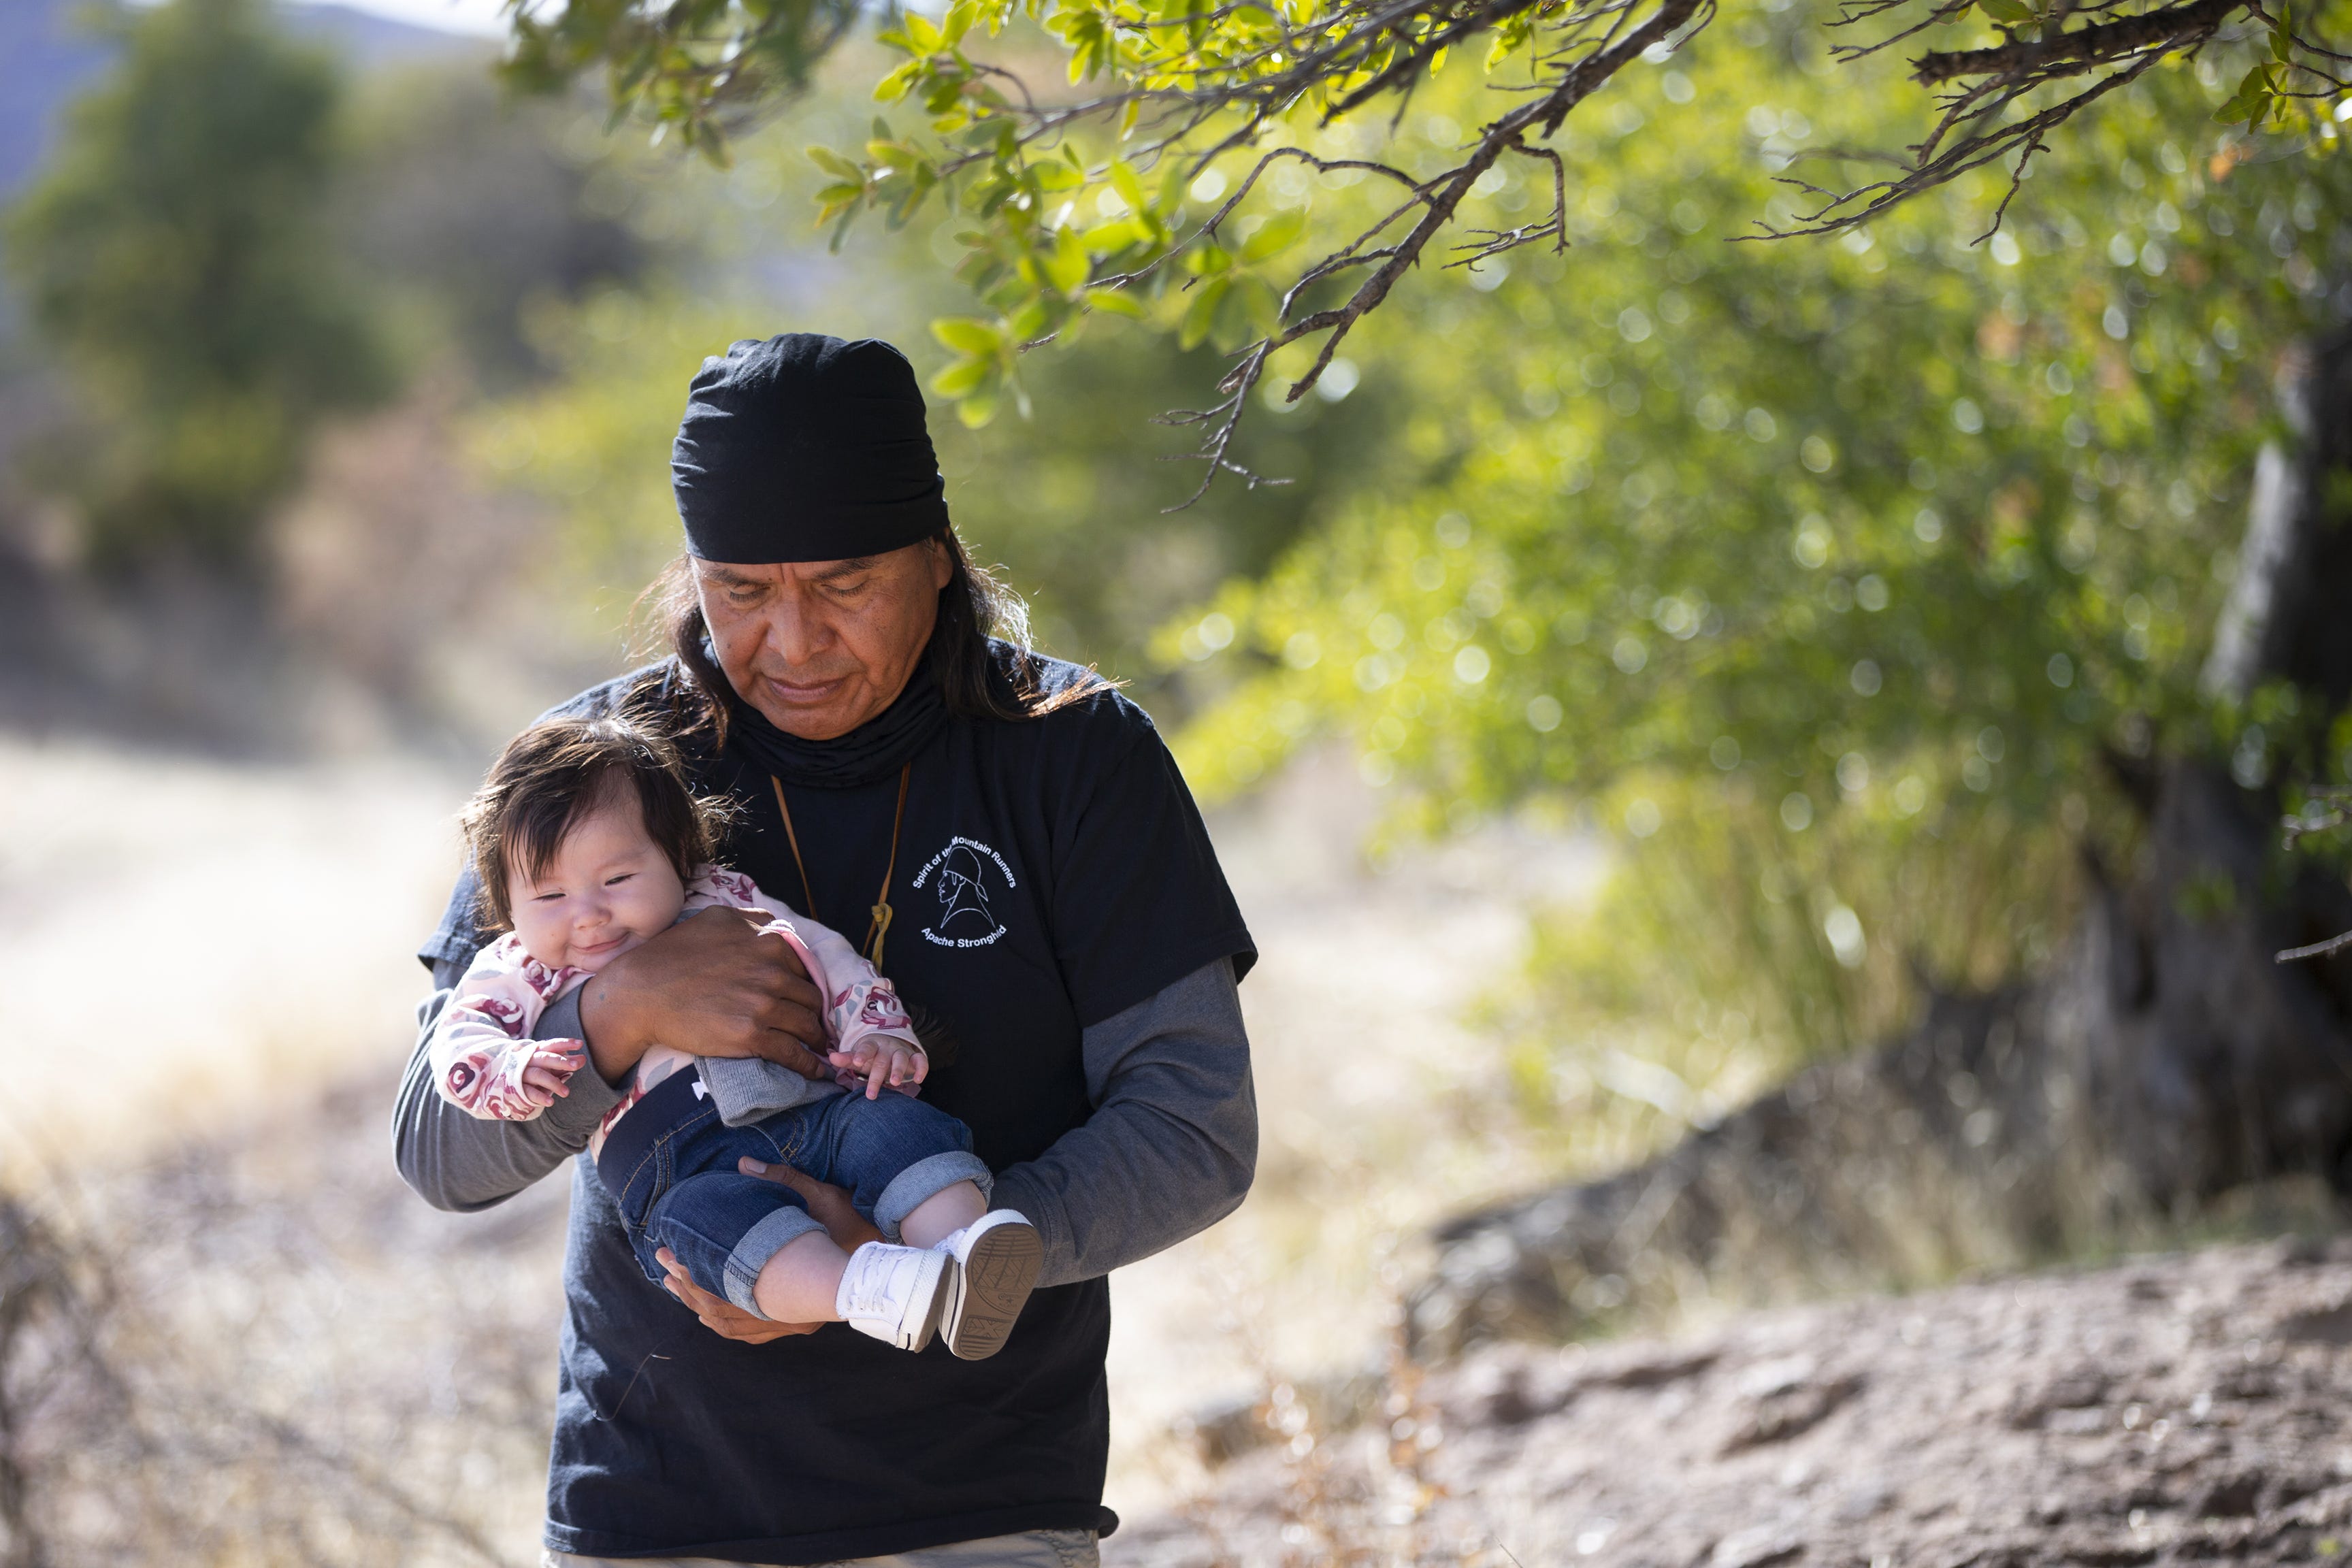 Former San Carlos Apache Tribe Chairman Wendsler Nosie Sr. and leader of Apache Stronghold walks with his 4-month-old granddaughter, Sha'yu Nosie-Frejo, at Oak Flat campground.